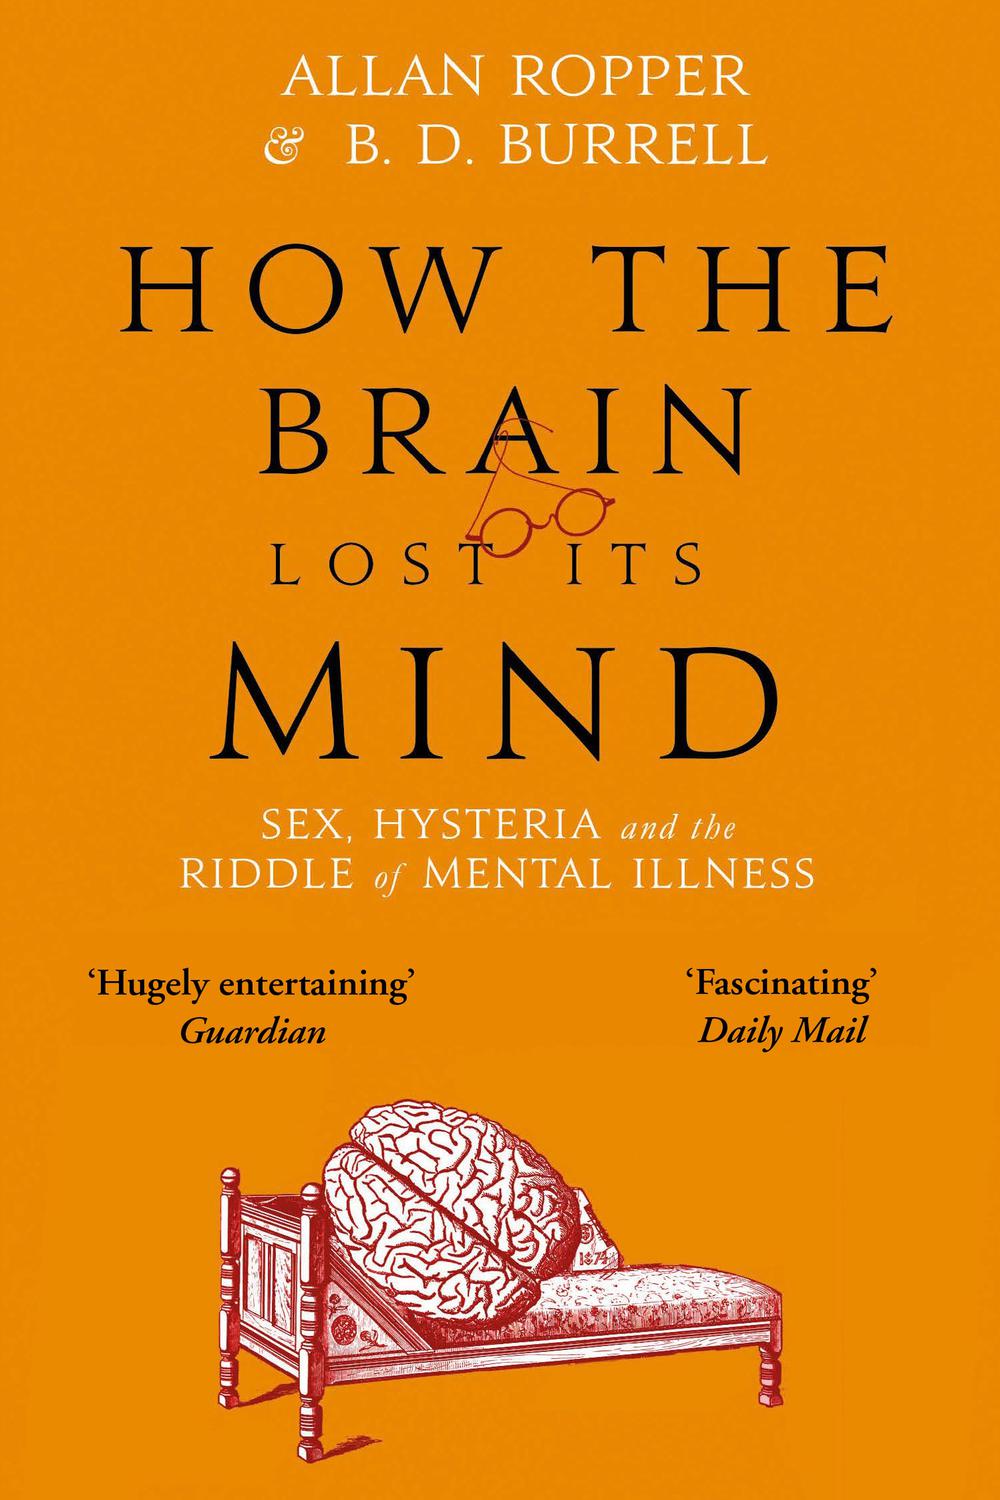 PDF] How The Brain Lost Its Mind by Allan Ropper eBook | Perlego